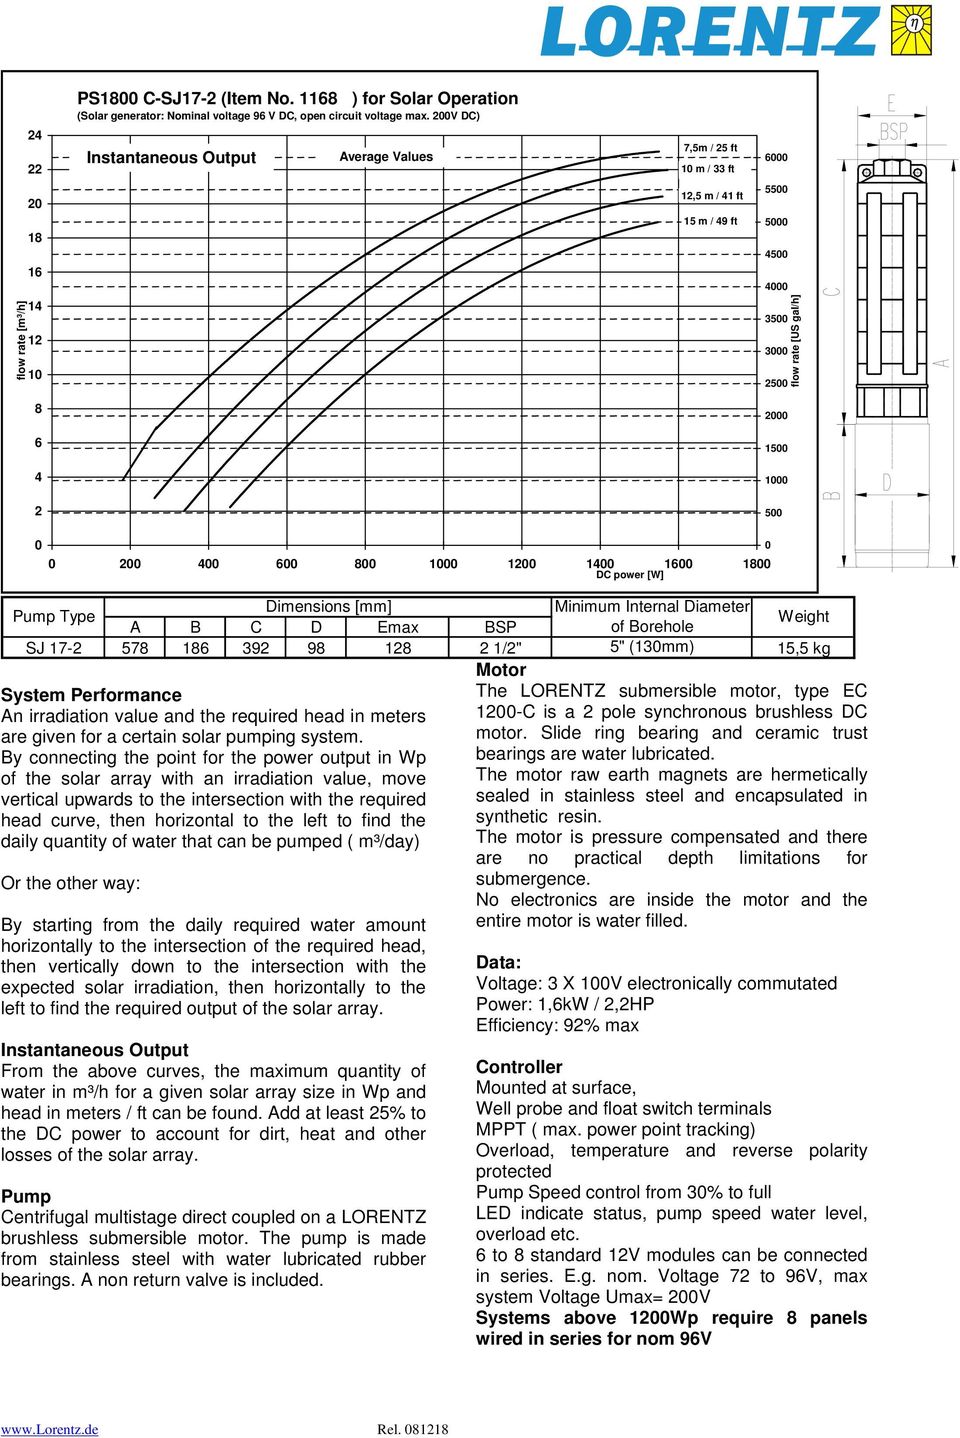 Type Dimensions [mm] A B C D Emax BSP SJ 17-2 57 16 392 9 12 2 1/2" 5" (13mm) 15,5 kg Motor System Performance An irradiation value and the required head in meters are given for a certain solar